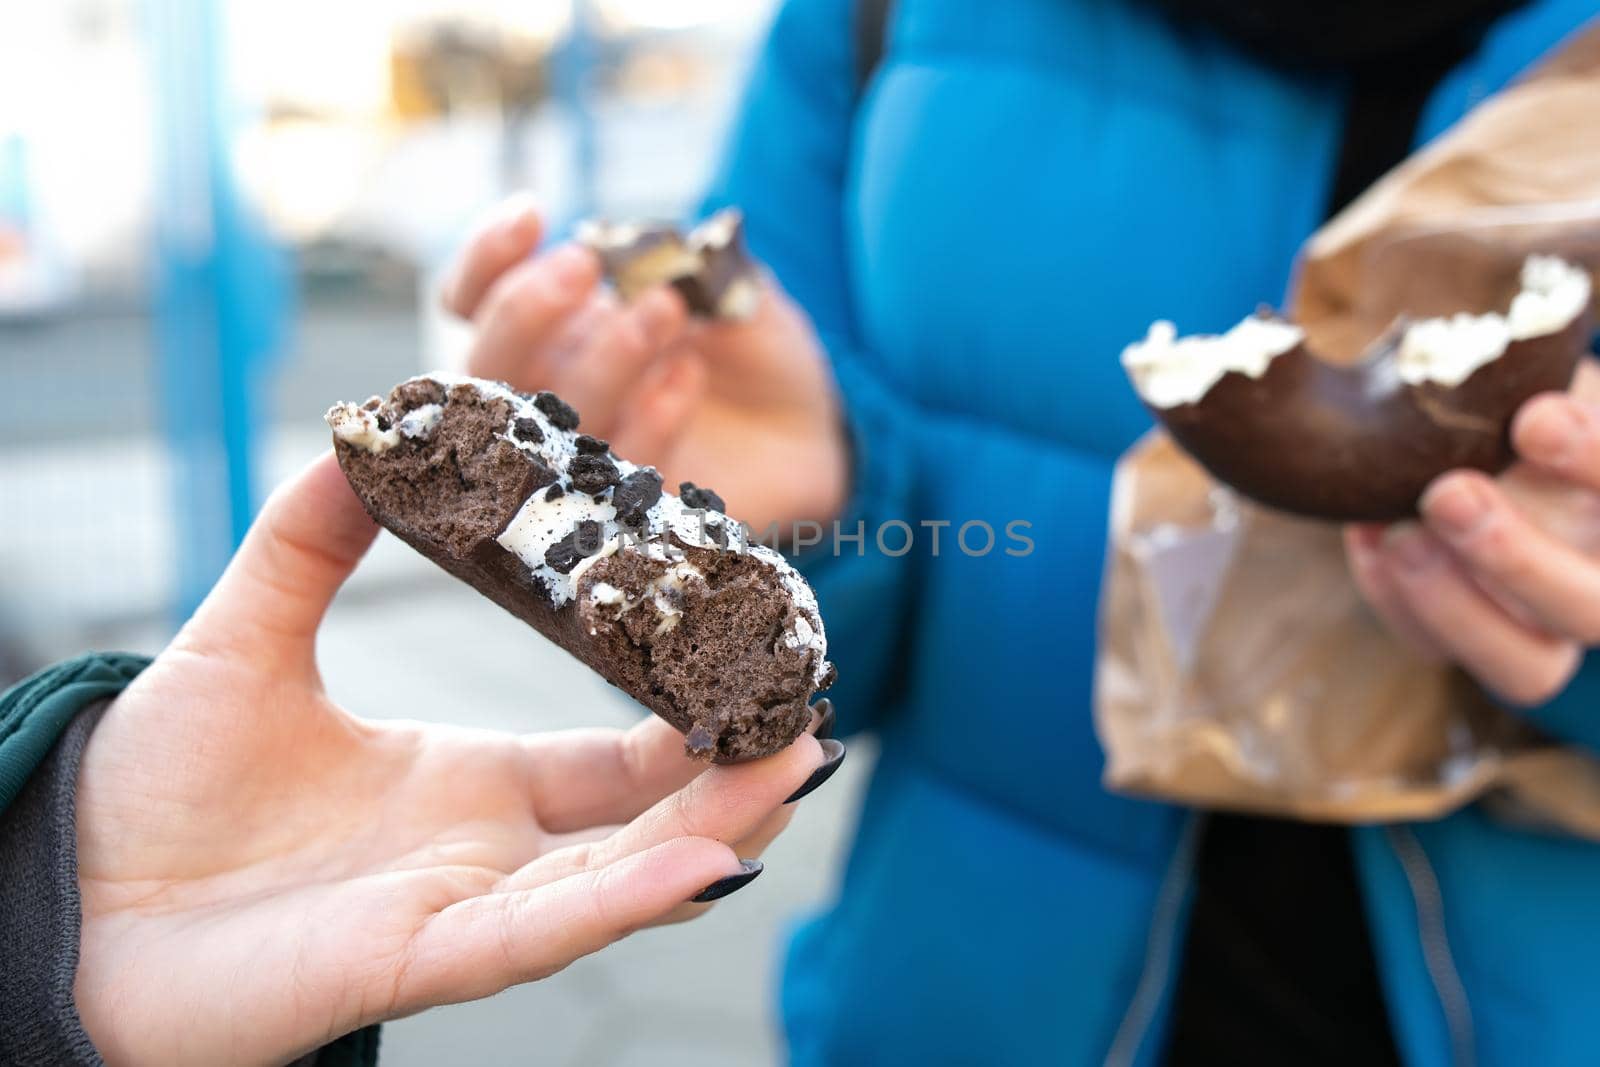 Female hands with tasty choco doughnut in the real life by Estival